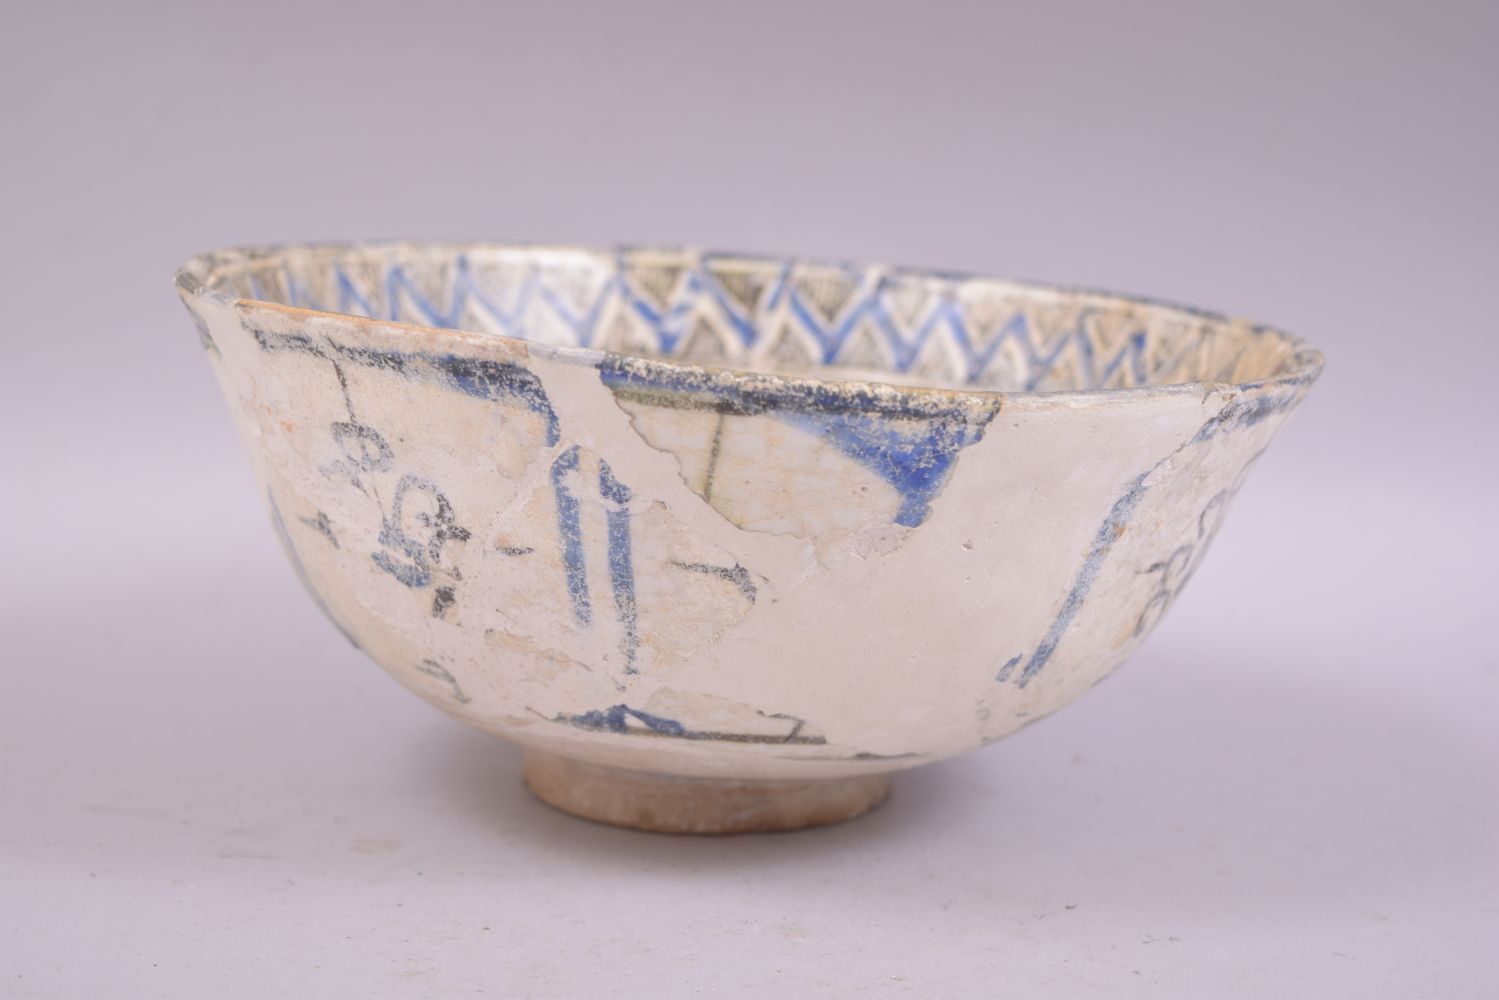 A LARGE PERSIAN TIMURID POTTERY BOWL, decorated with various stylised motifs, 22cm diameter. - Image 2 of 6